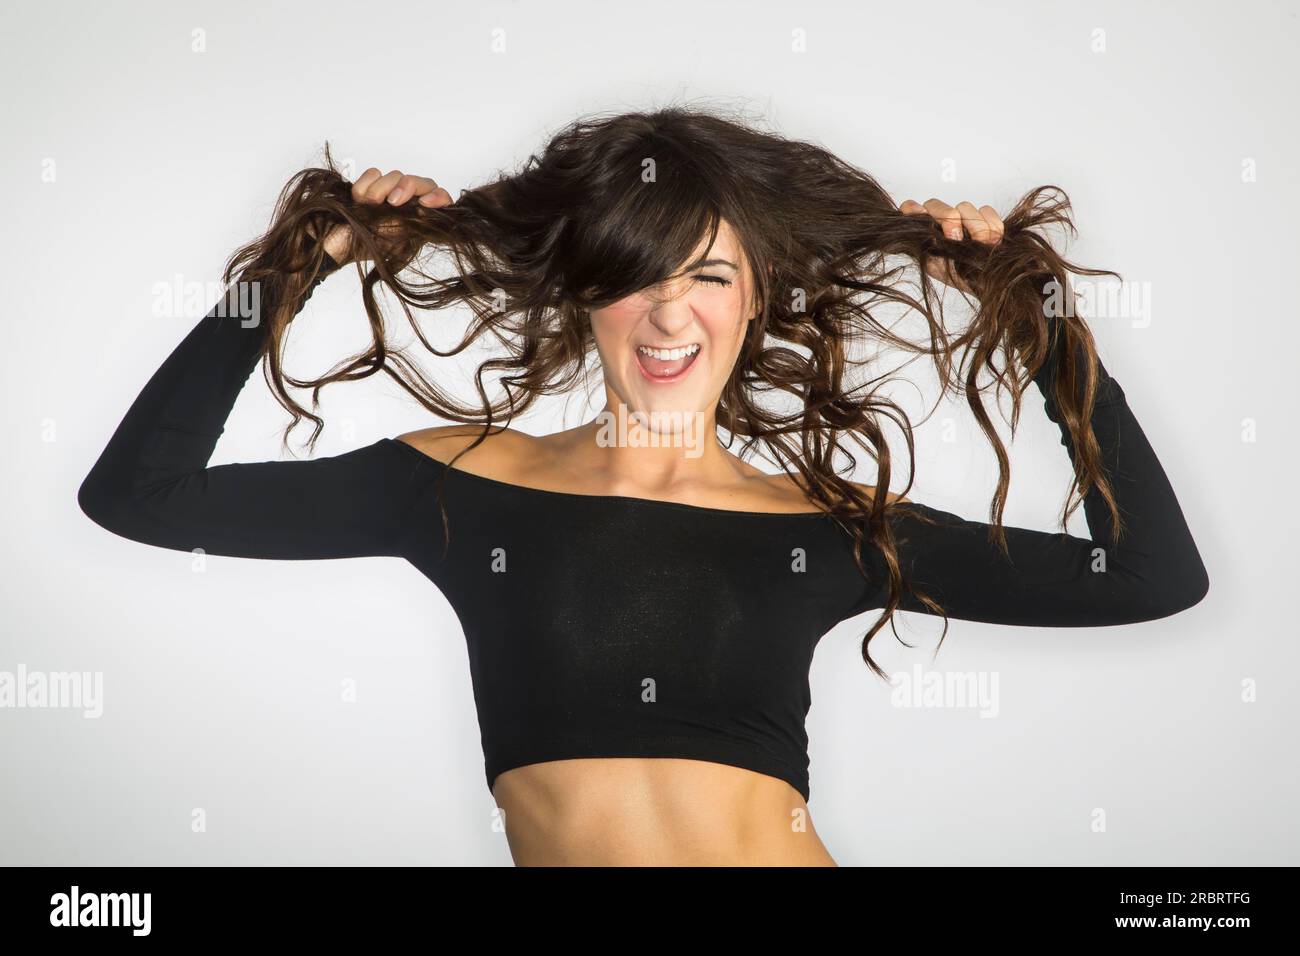 A dark haired model screaming, showing emotion Stock Photo